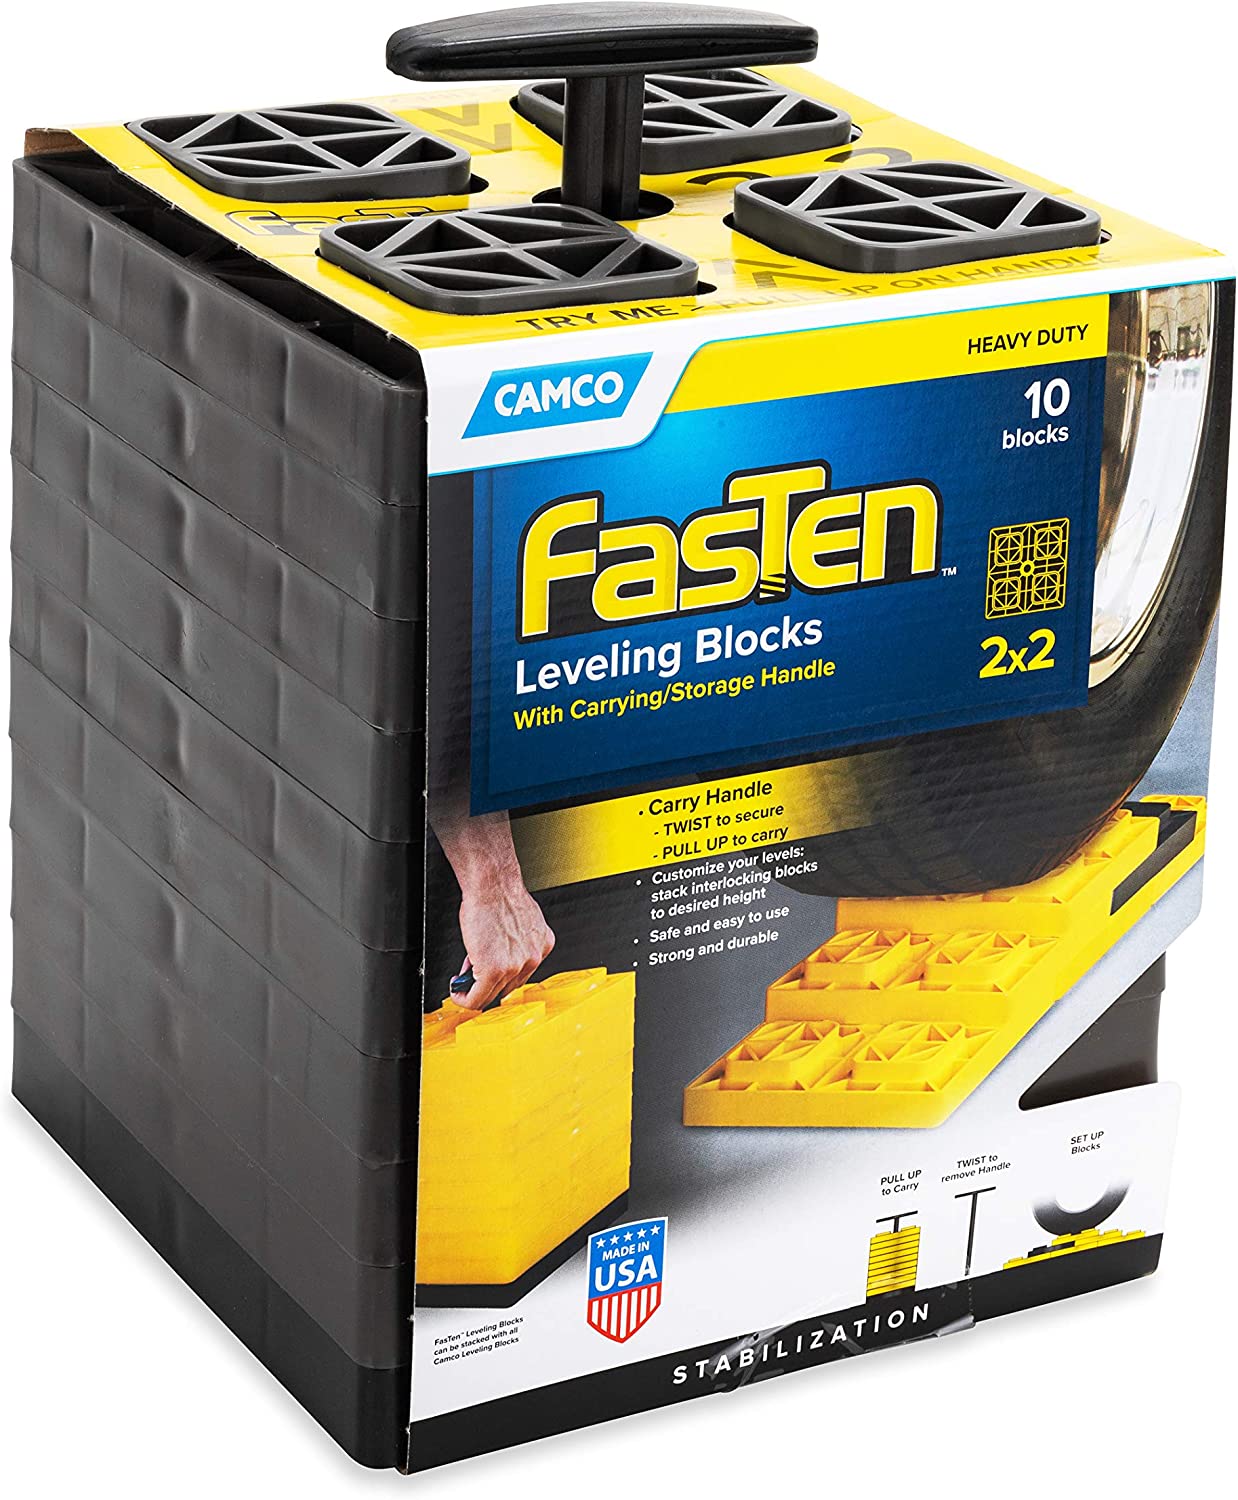 Camco 44521 FasTen Leveling Blocks - w / T-Handle,2x2,Brown 10 pack Bilingual